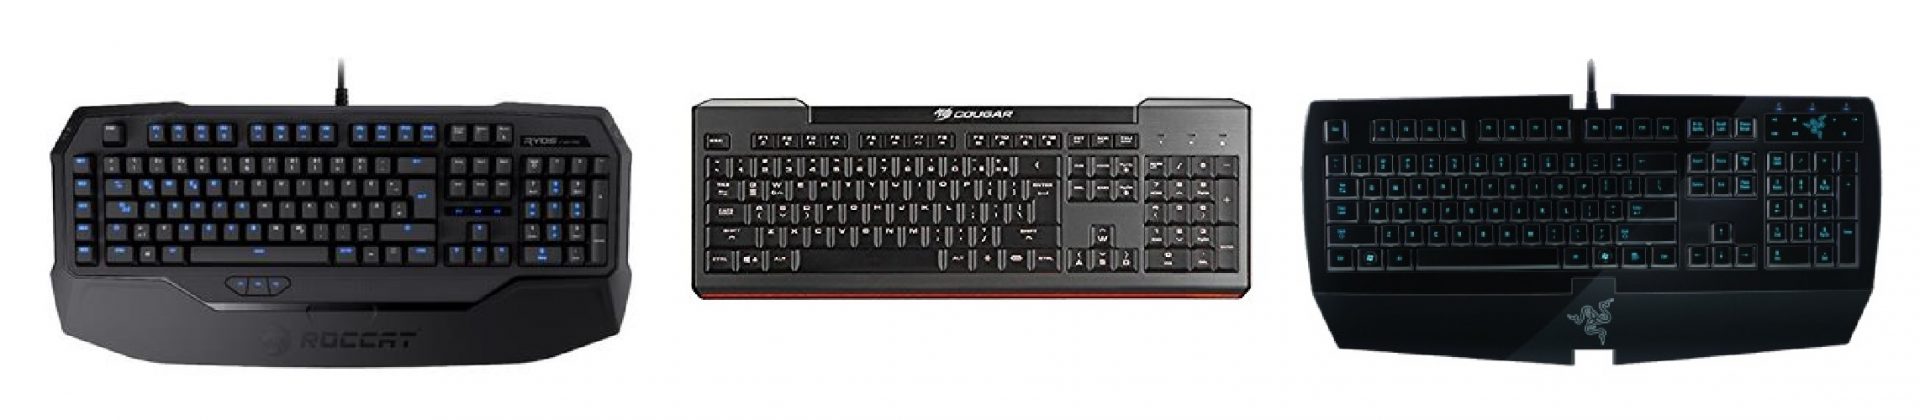 Late Keyboard Review – Cougar 200K